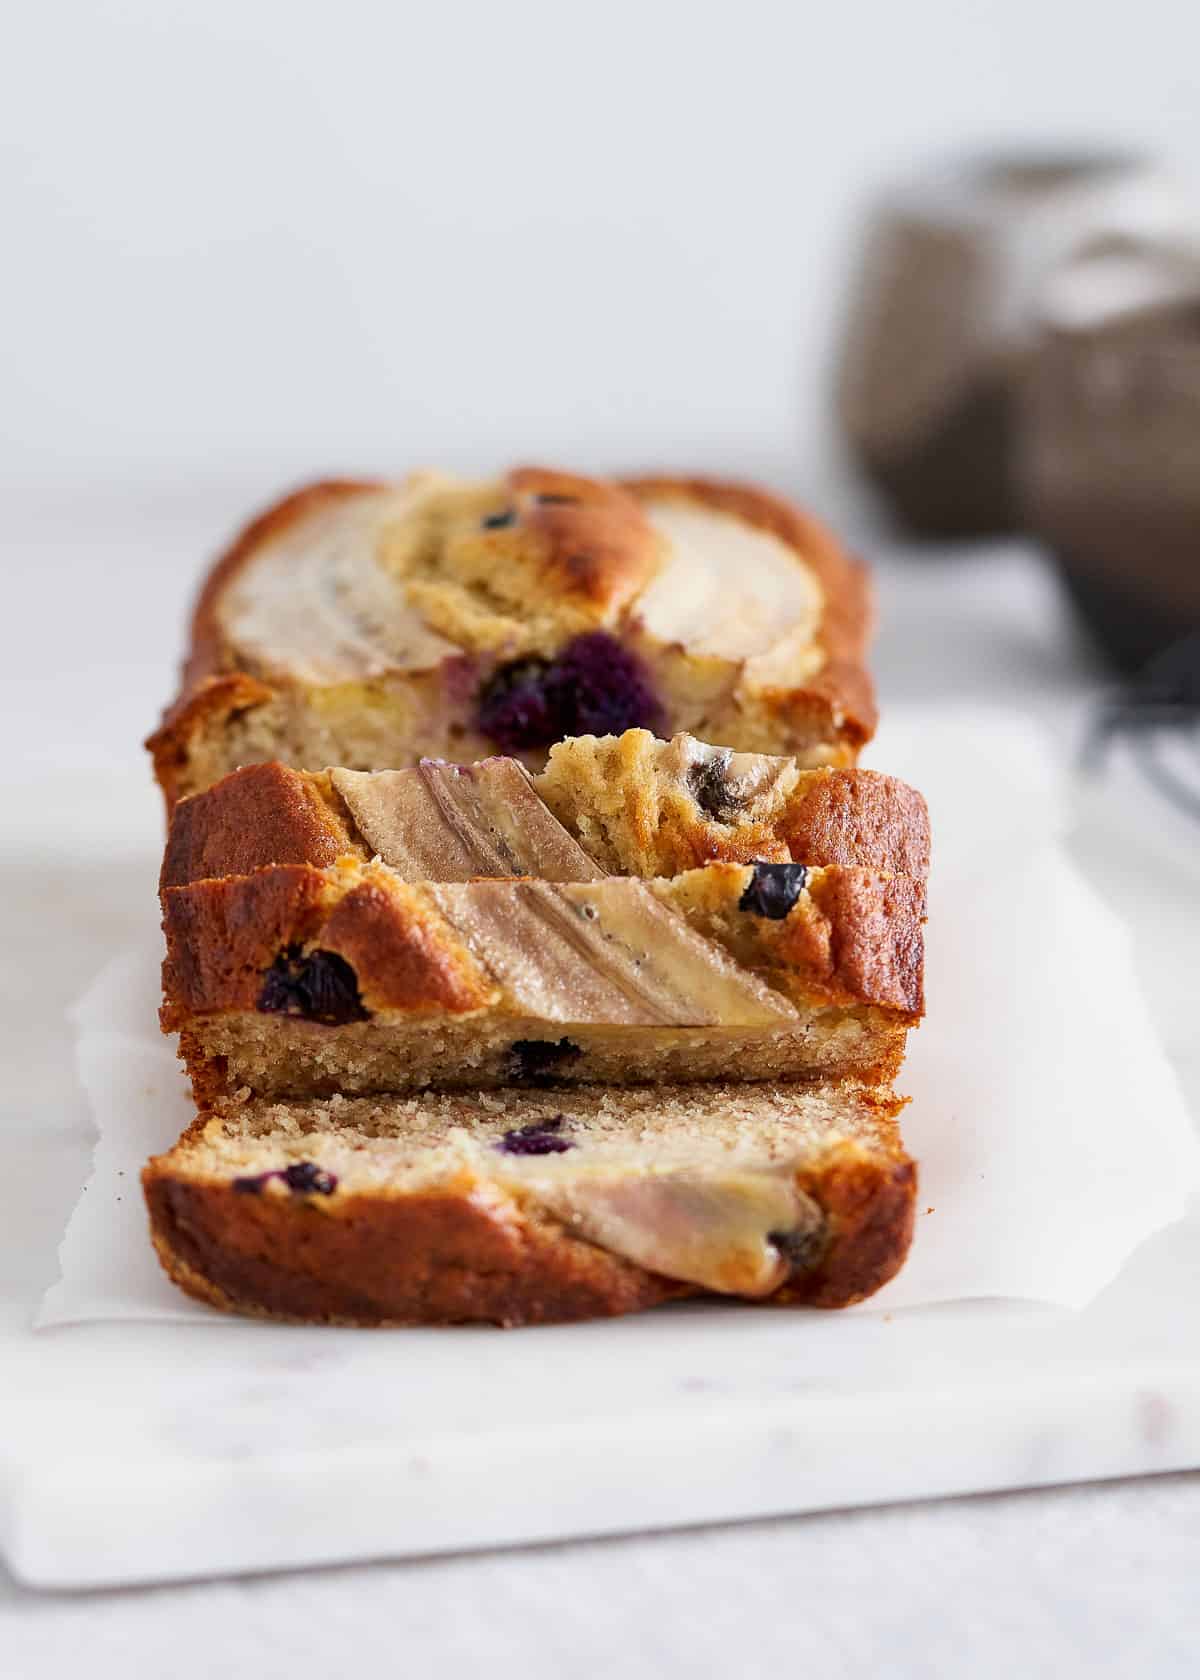 A loaf of blueberry banana bread, right out of the oven and sliced.